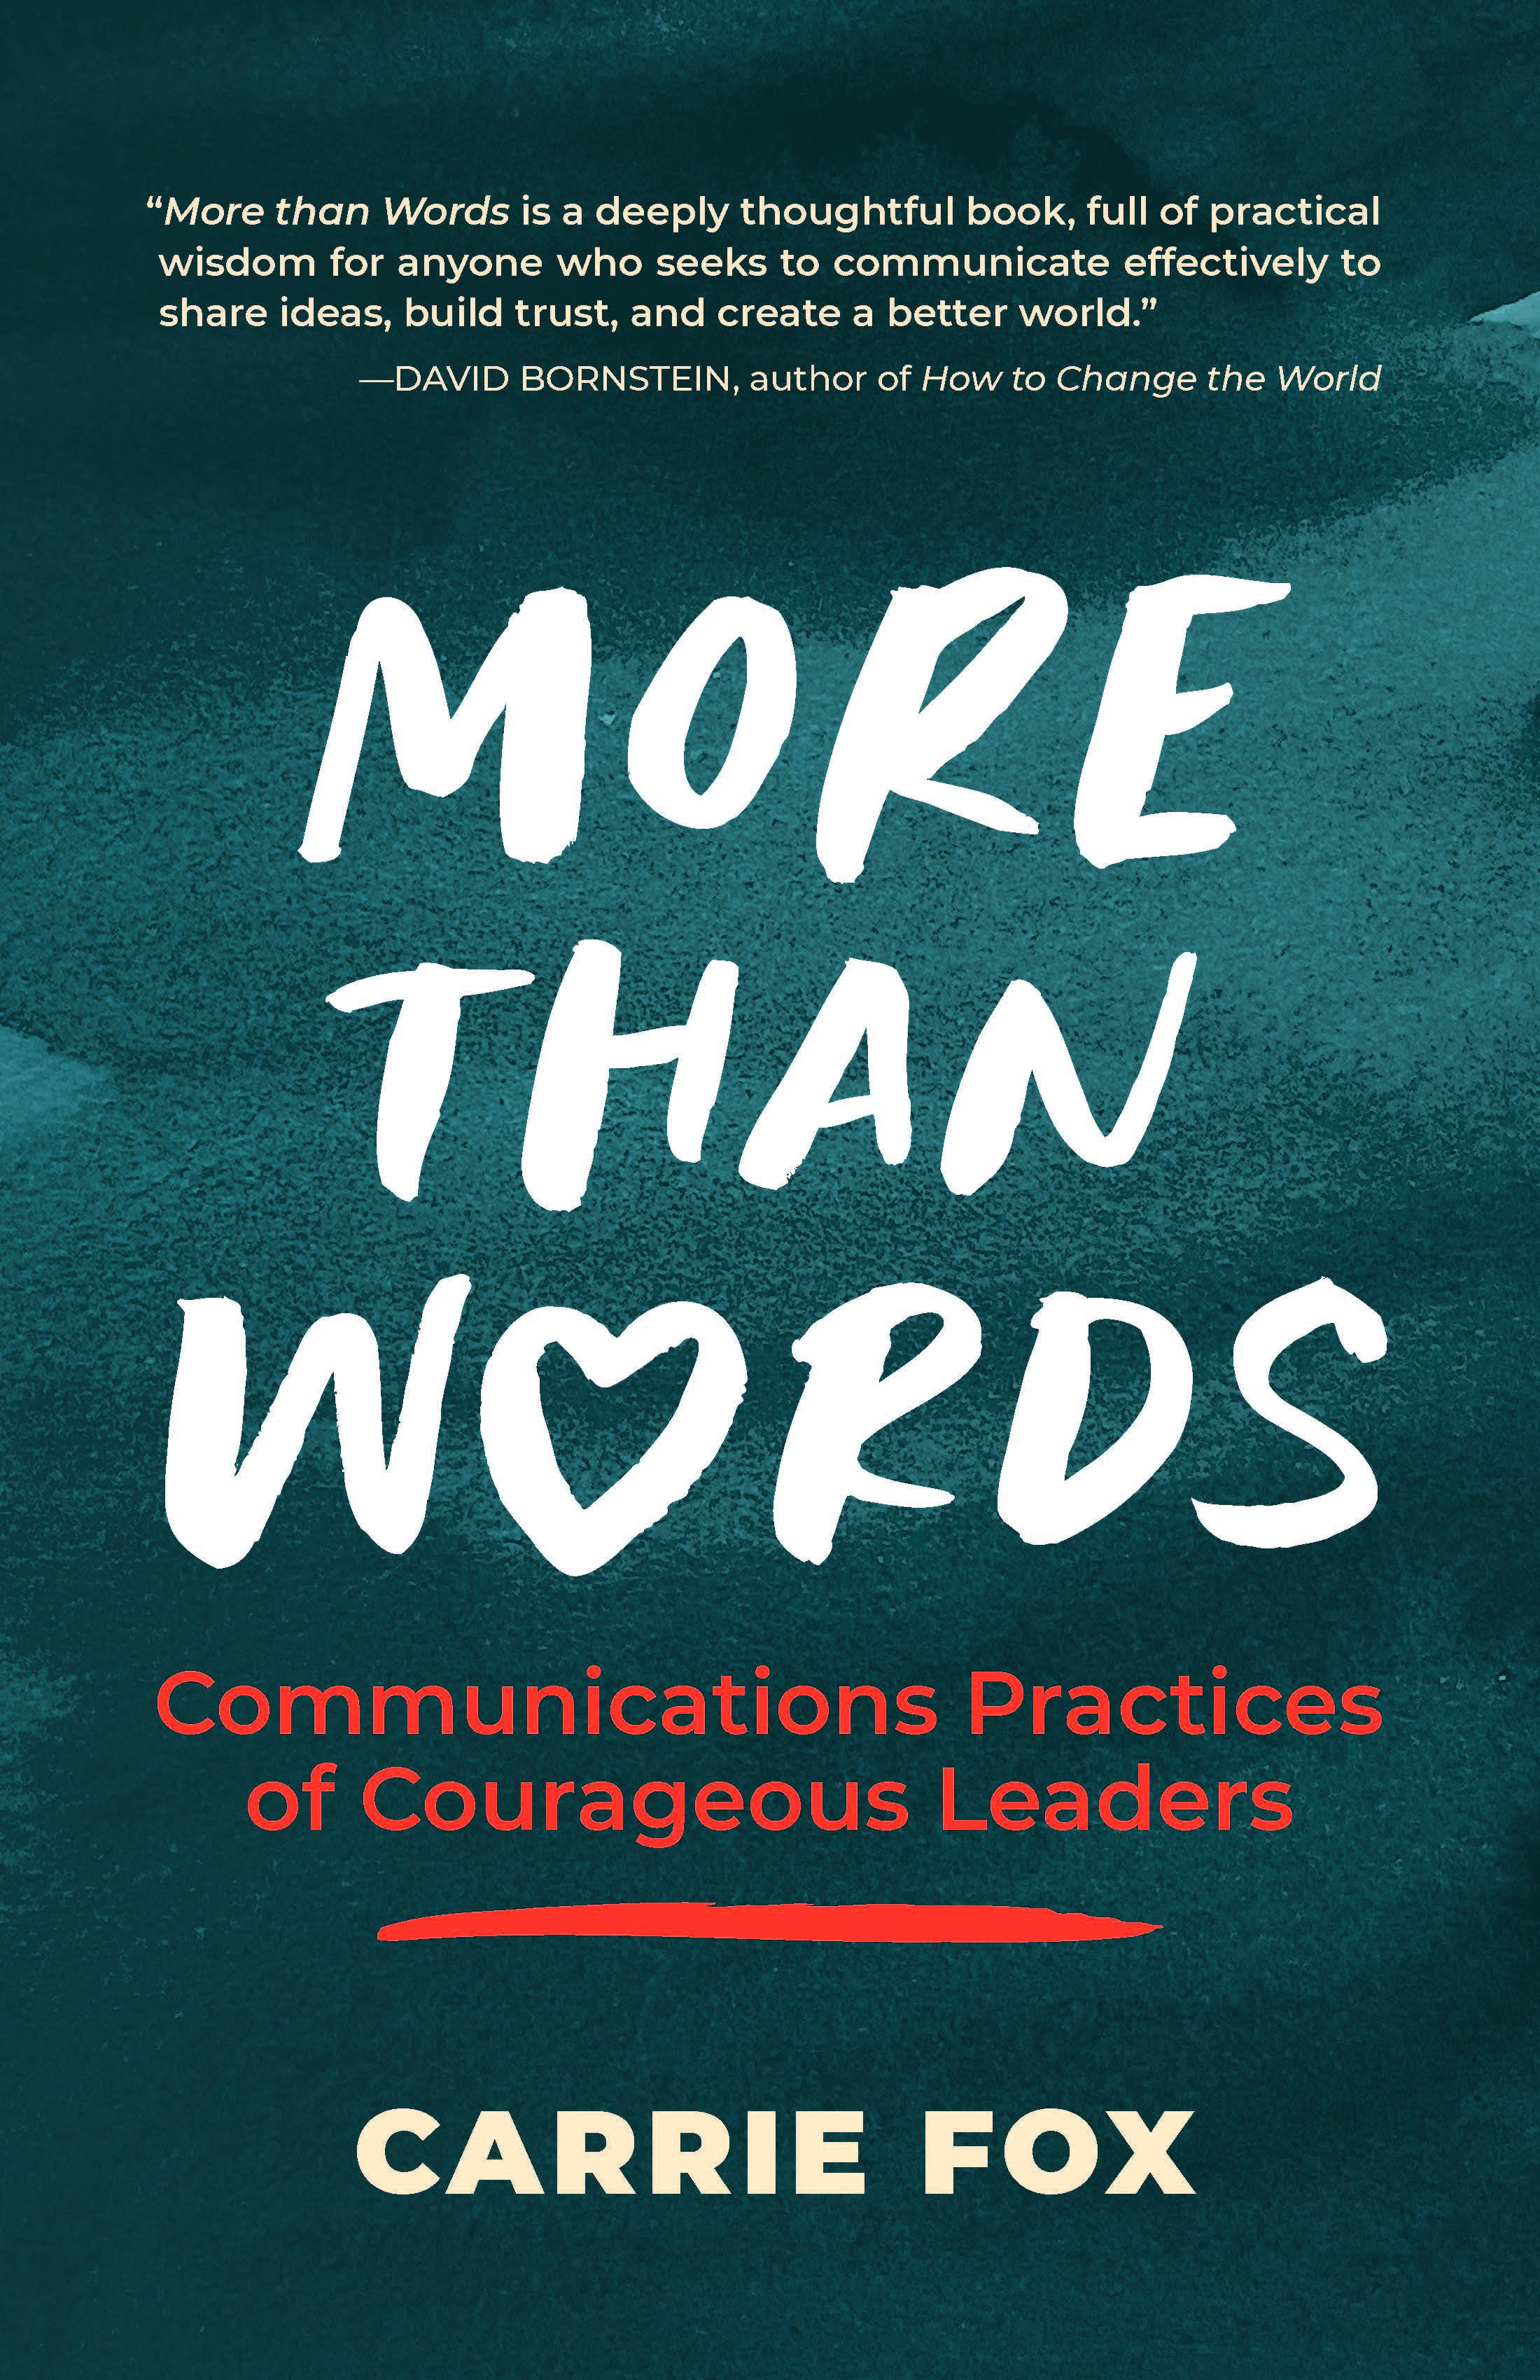 A Champion of Social Impact Communications Shares Insights in New Book